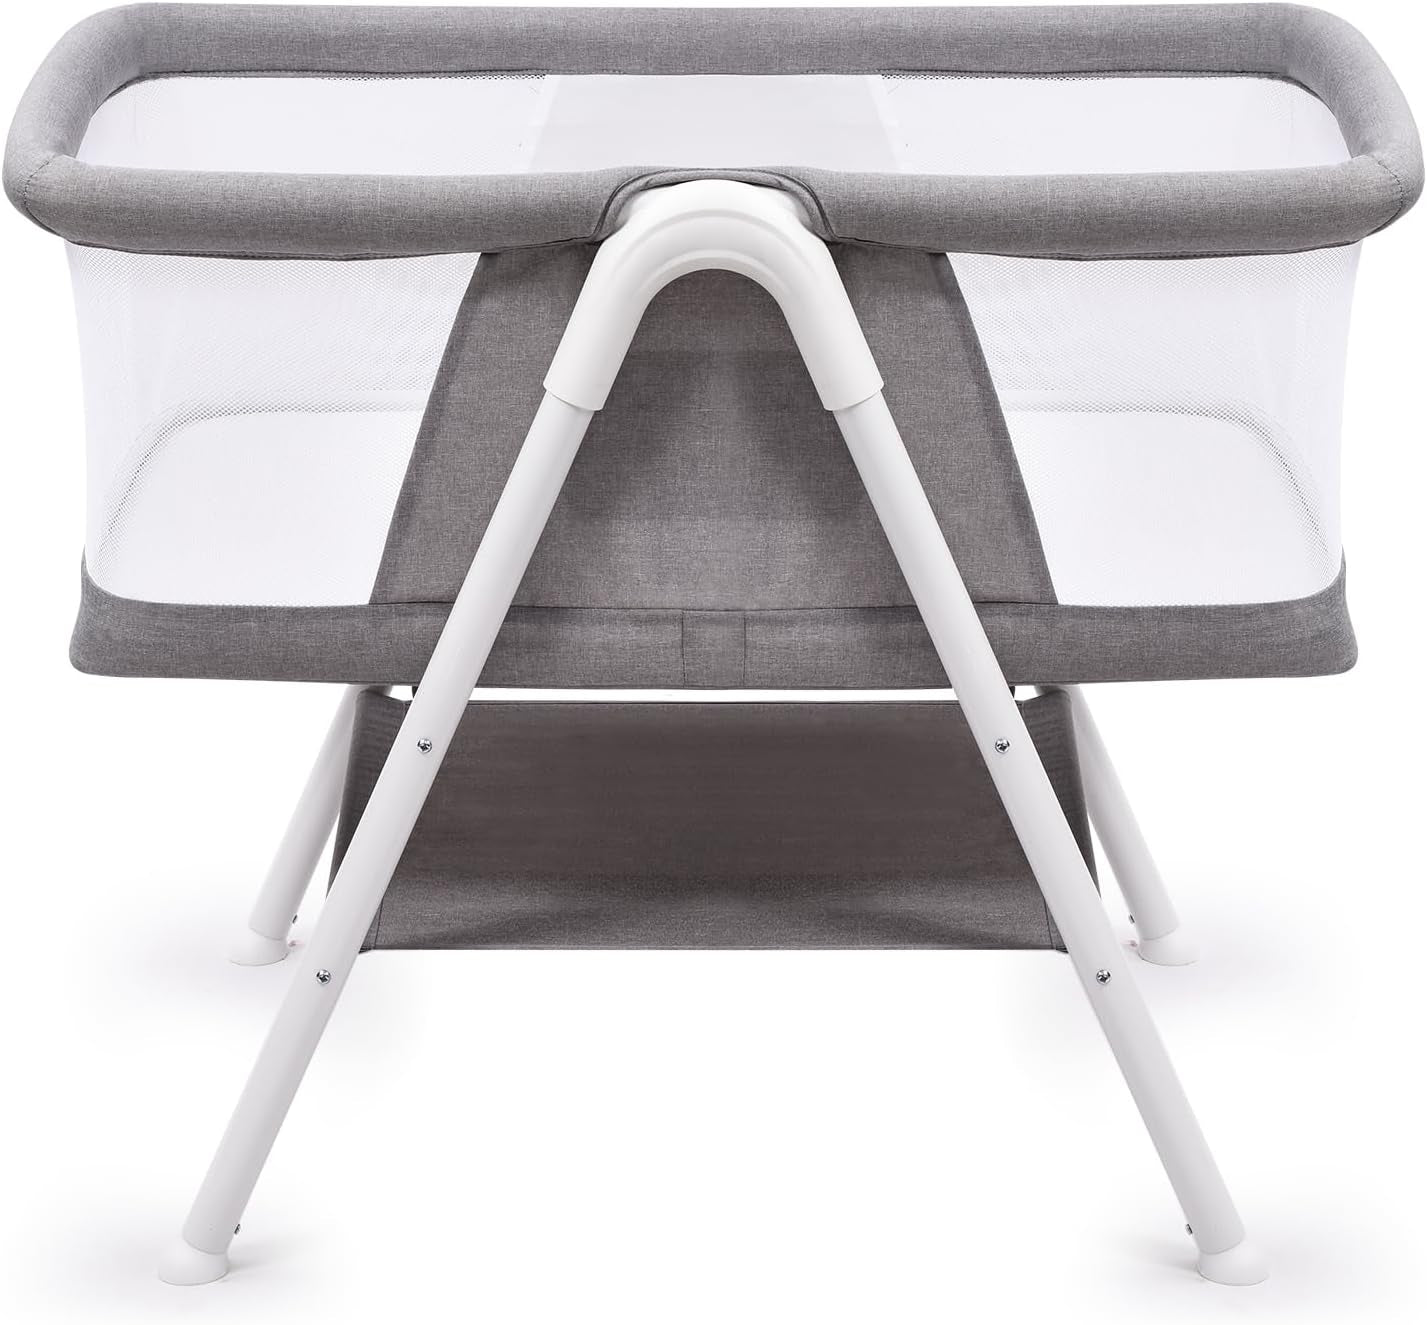 Bassinet, Baby Crib, Lightweight and Breathable Mesh Design, Easy to Clean,Gray - Design By Technique